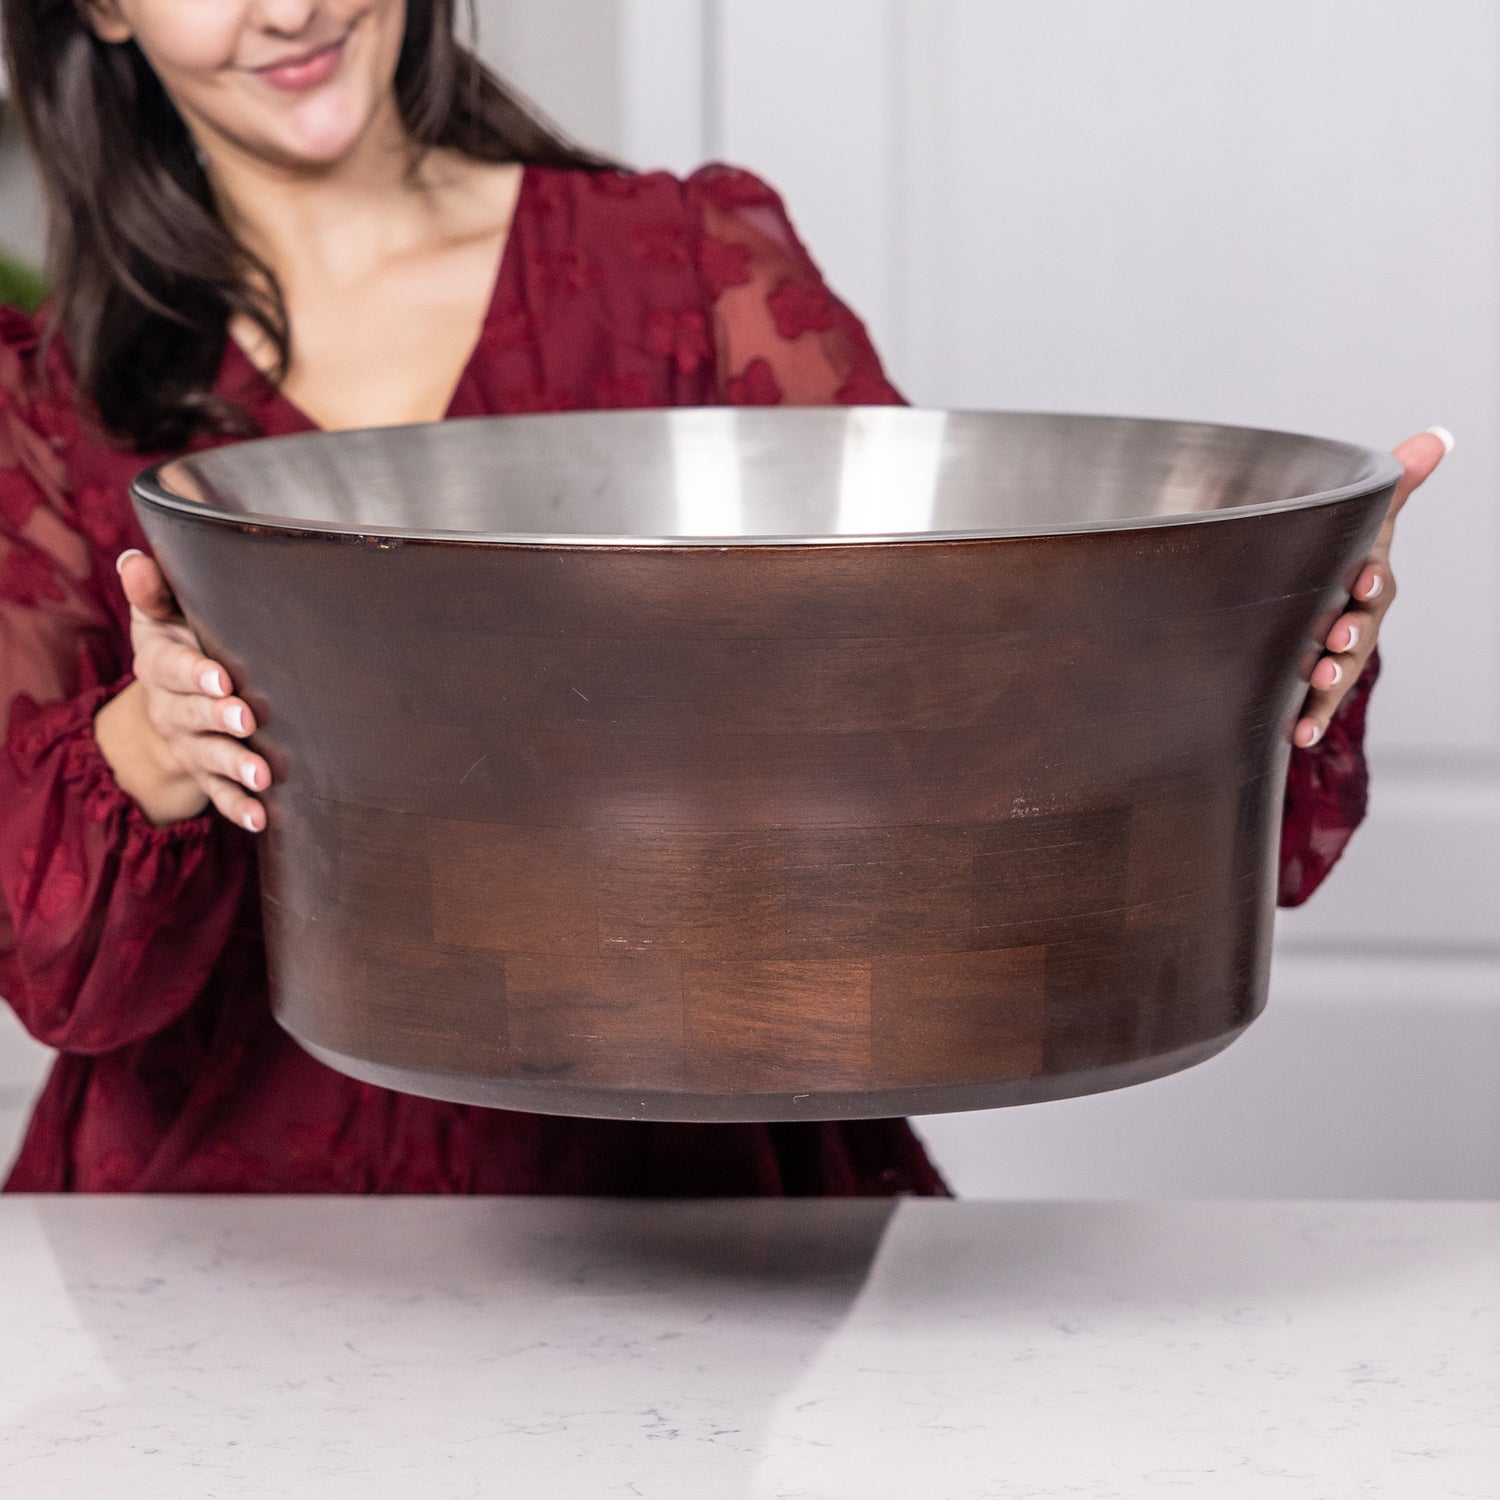 Large round beverage tub, insulated and double walled, with an interior stainless steel and exterior mango wood.  100% leak proof construction.  Absolutely no leaking.  Use in your home when celebrating a wedding, anniversary, birthday, or holiday.  Holds the most wine, beer, champagne, and other favorite drinks.